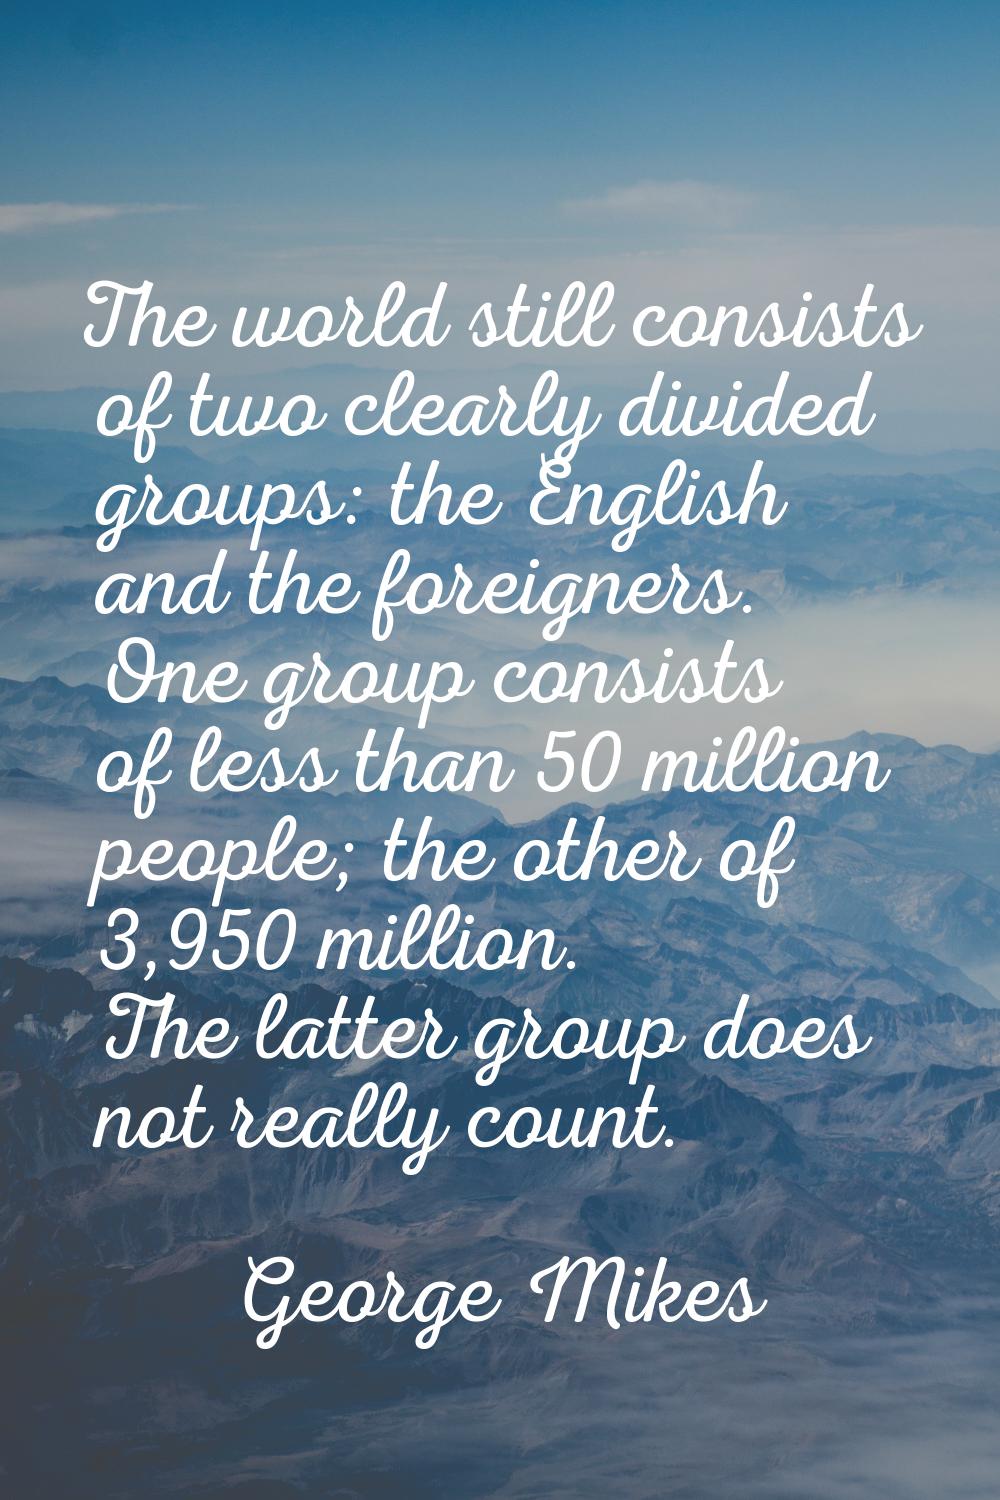 The world still consists of two clearly divided groups: the English and the foreigners. One group c